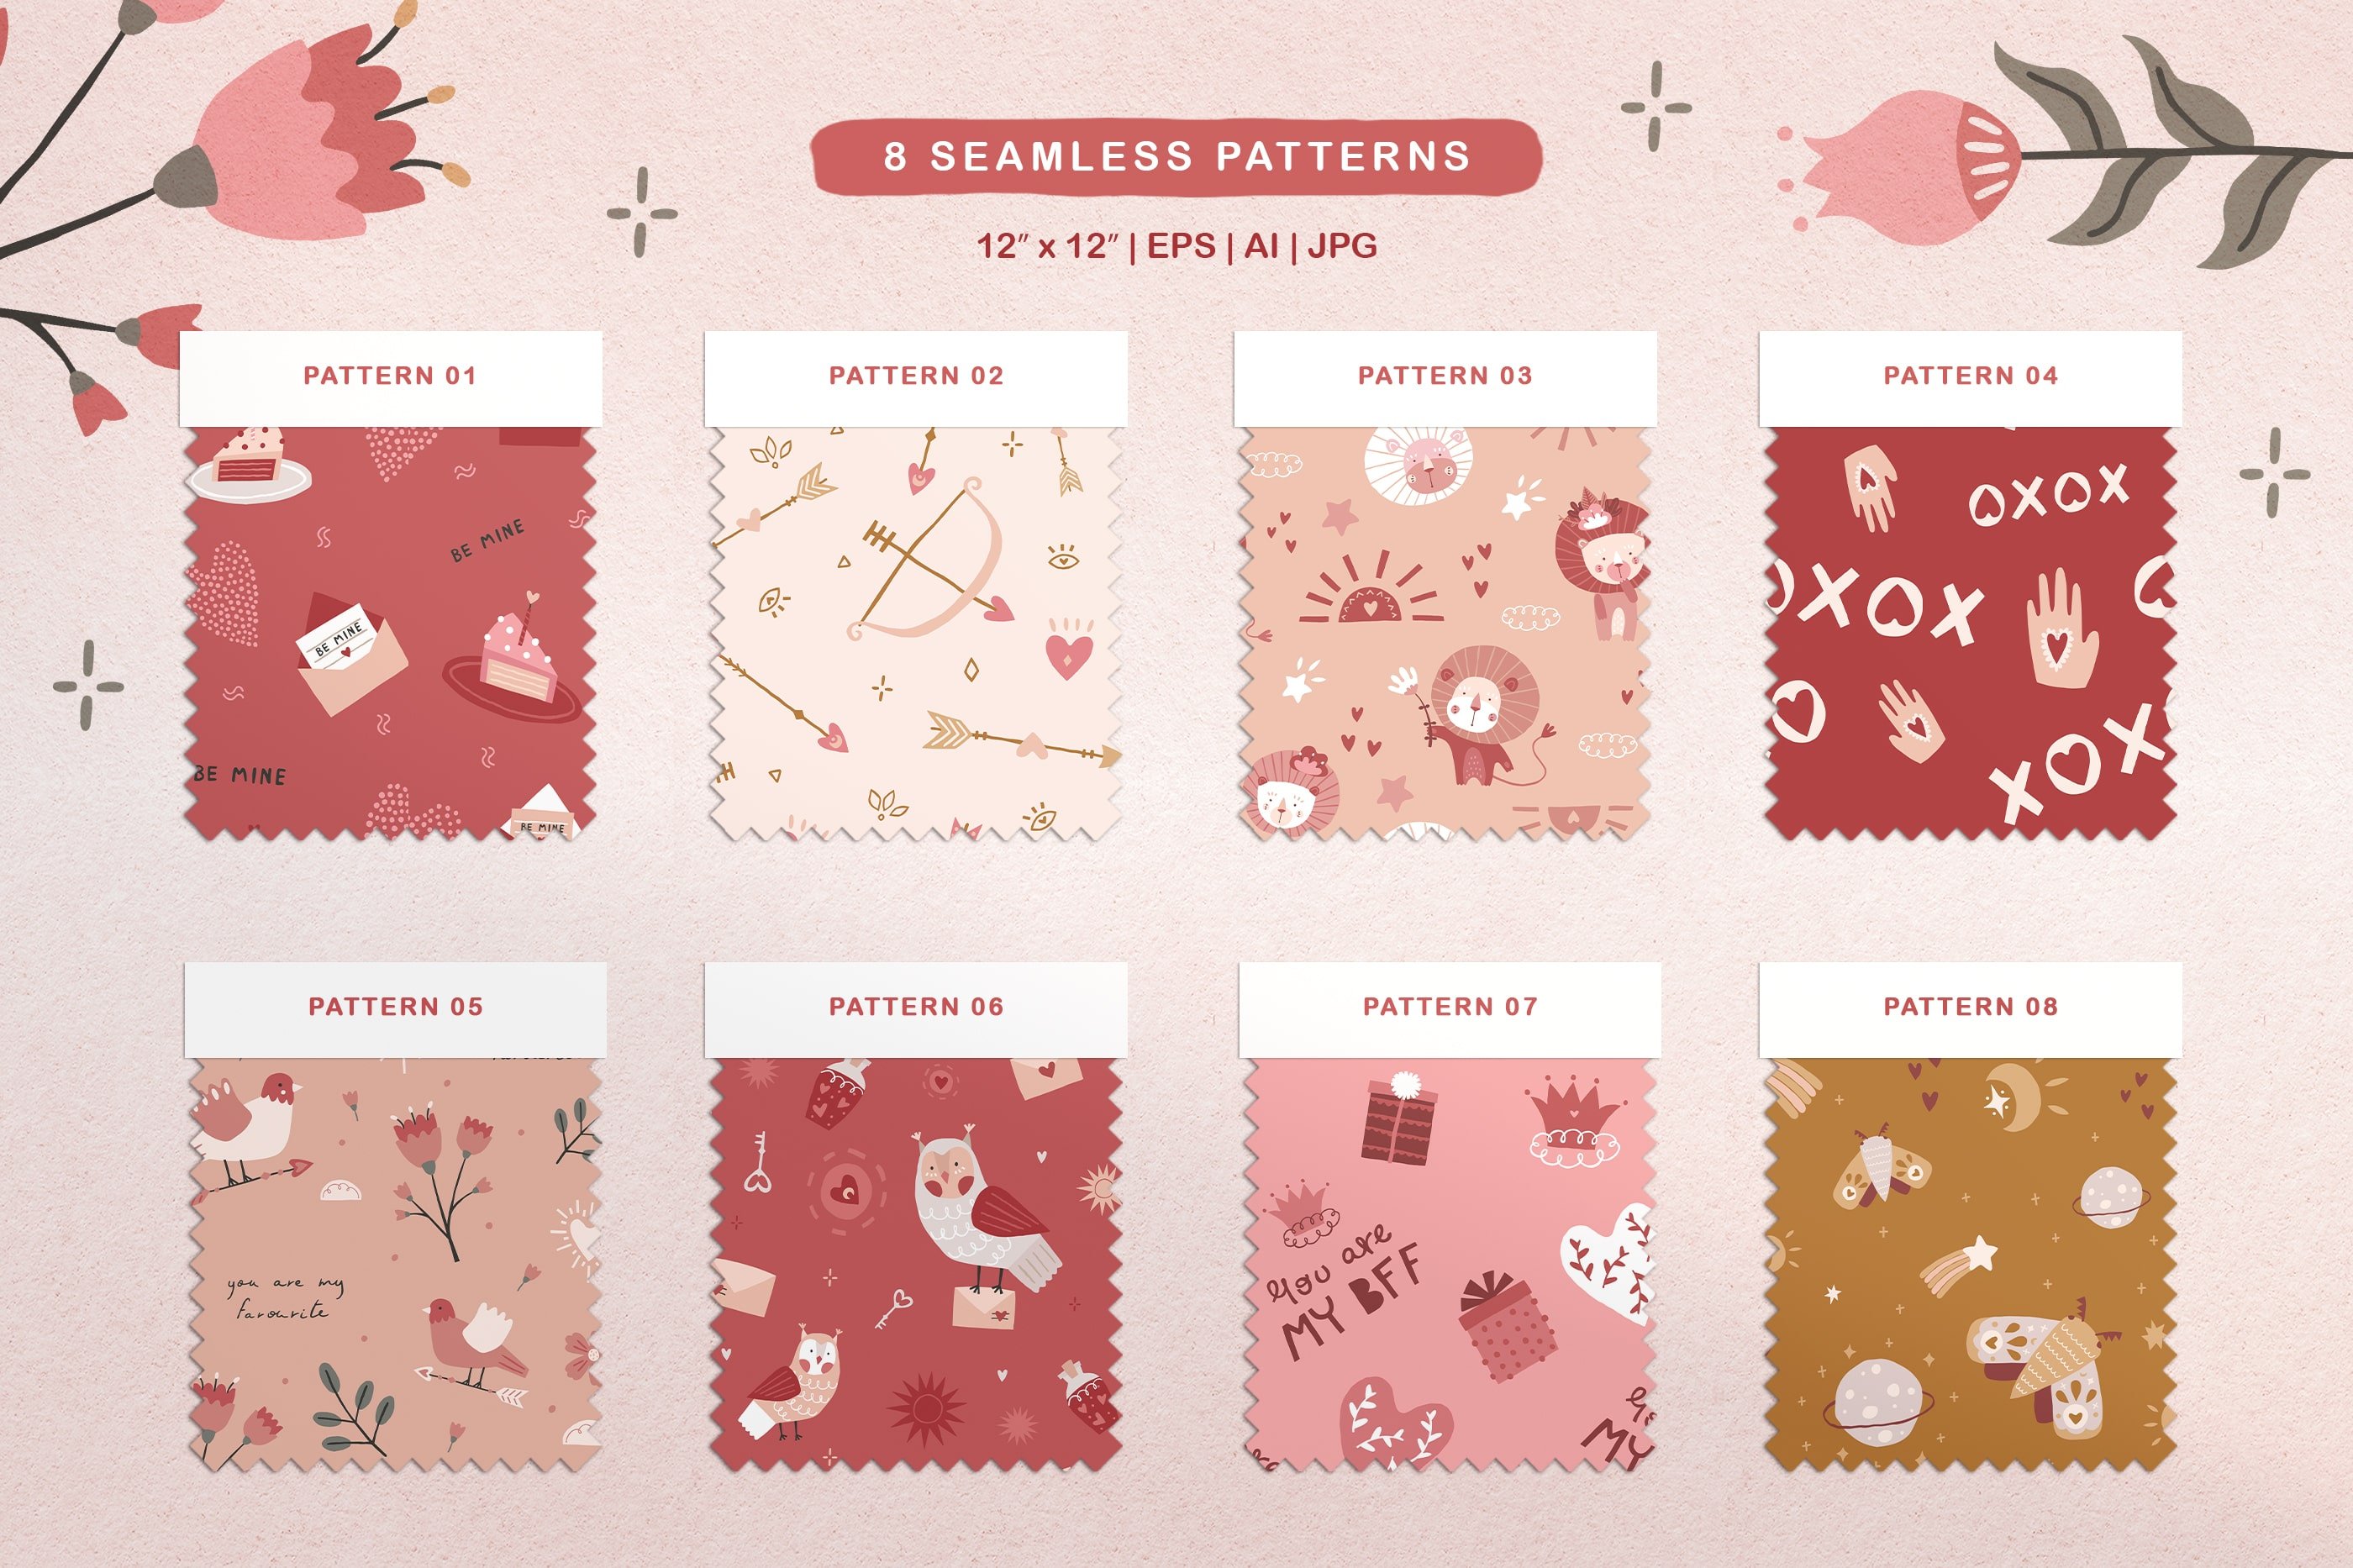 You will get 8 seamless patterns.